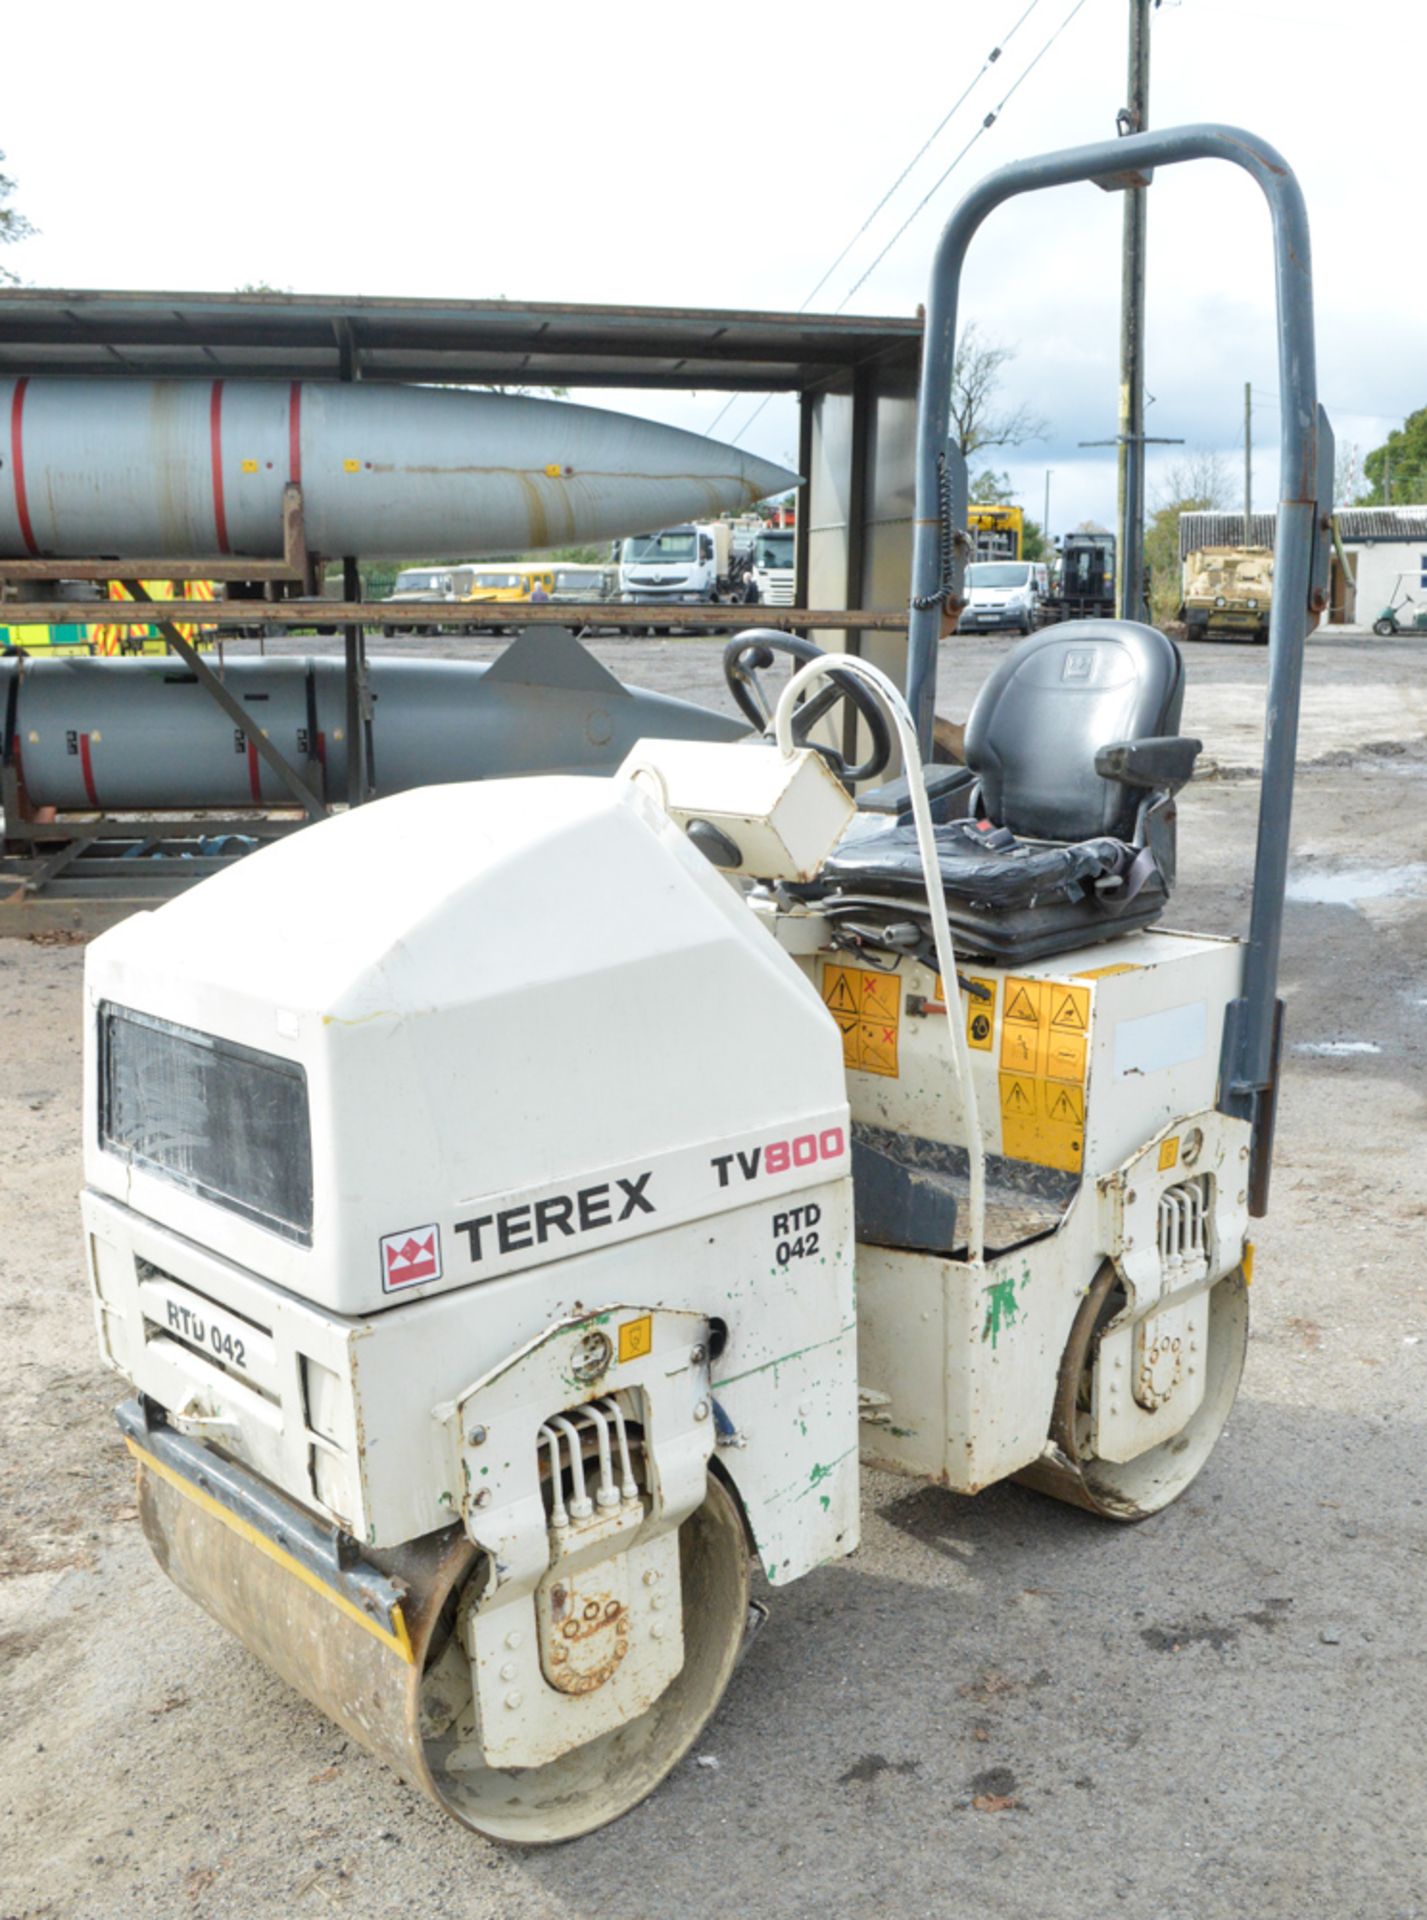 Benford Terex TV800 double drum ride on roller Year: 2007 S/N: E710HU204 Recorded Hours: 320 RTD042